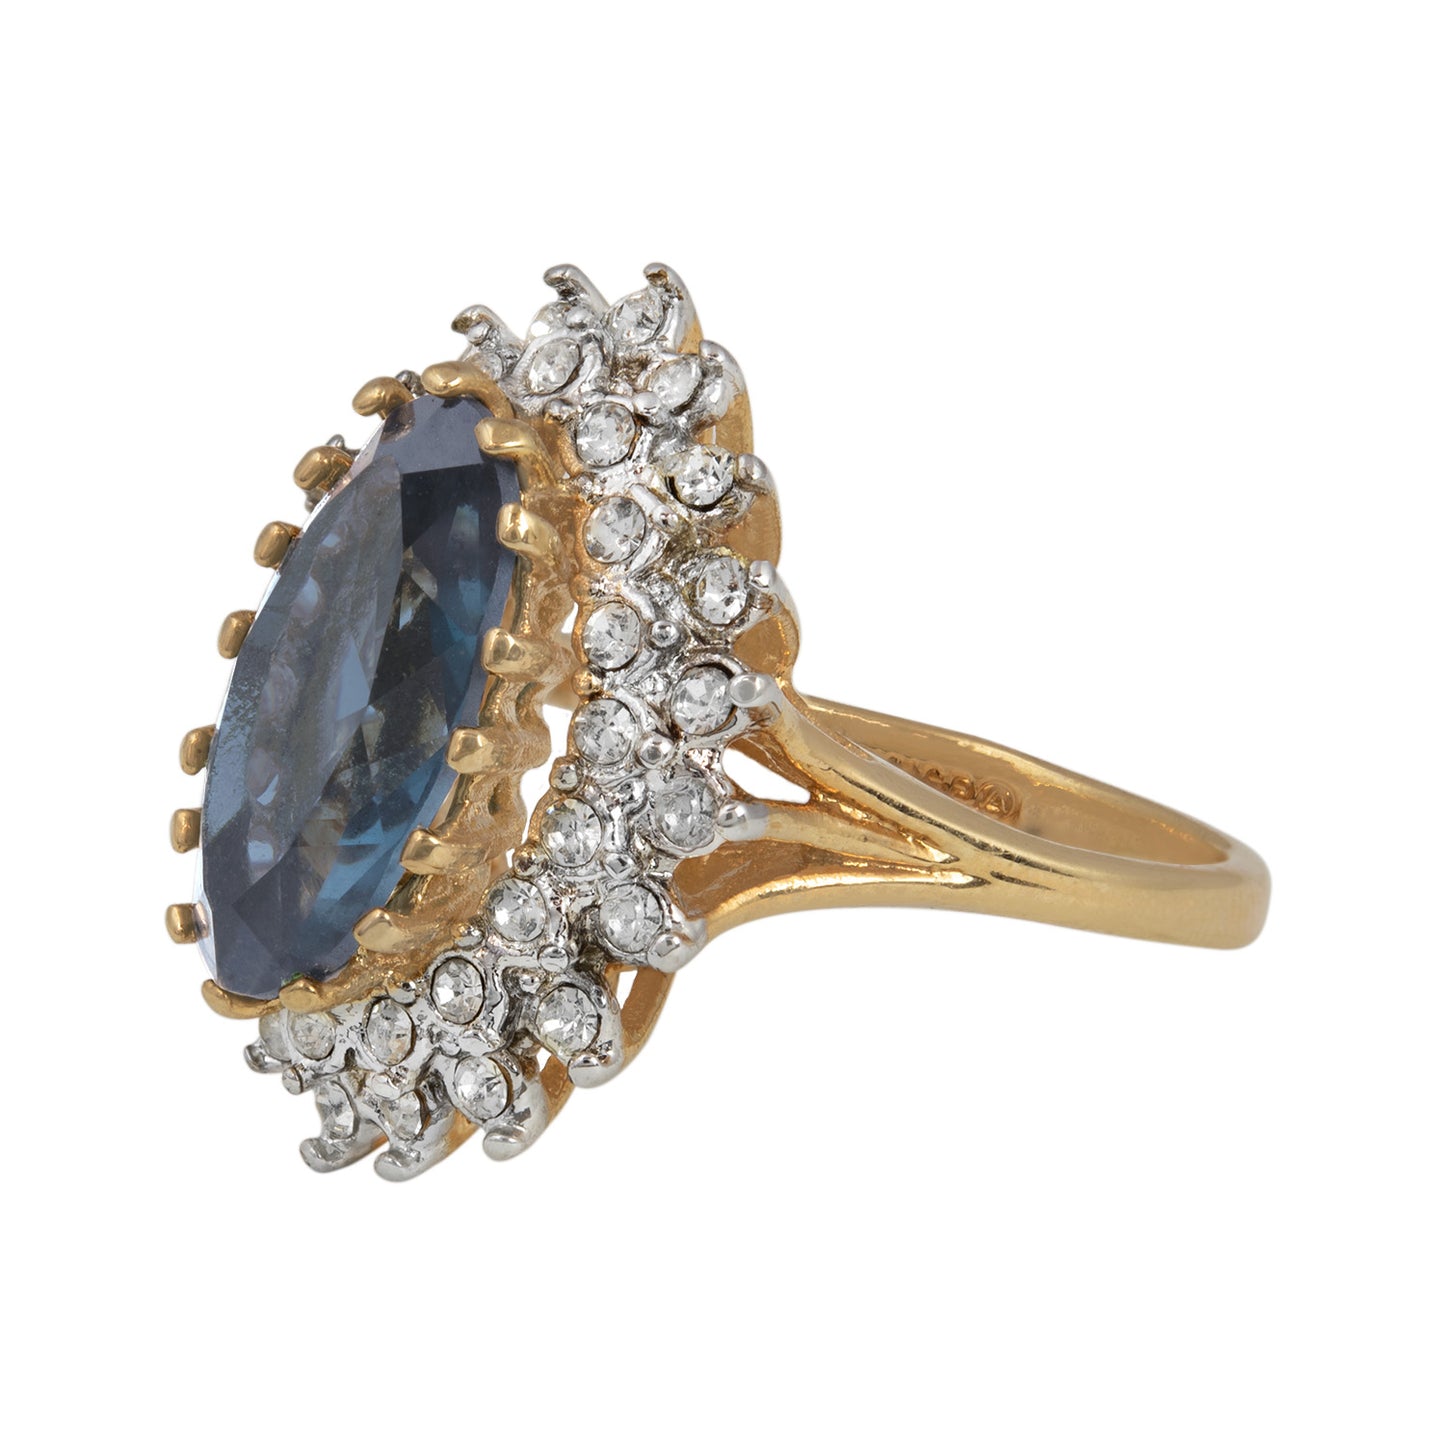 Vintage Ring Sapphire Crystal Cocktail Ring with Clear Austrian Crystals Plated in Gold Tone Antique Womans Jewelry Size: undefined